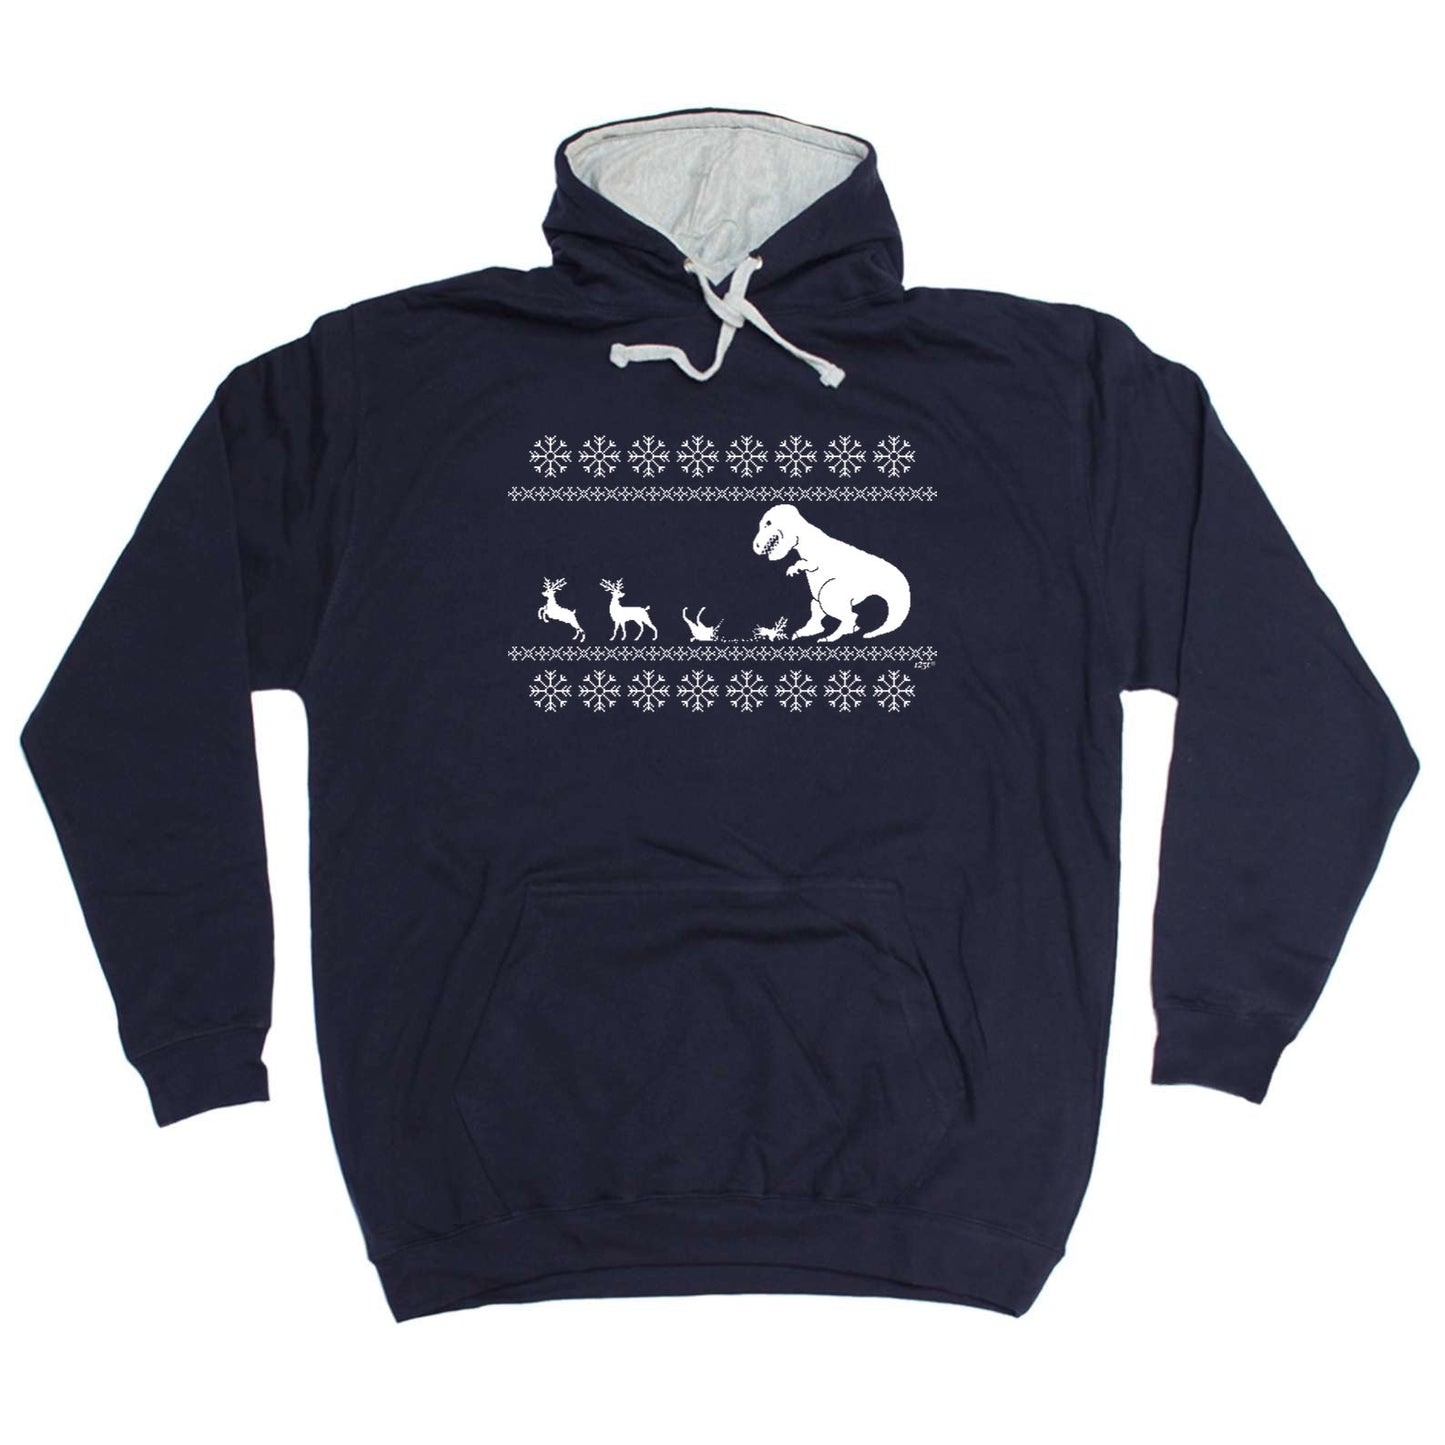 Christmas Lunch For Trex Jumper - Xmas Novelty Hoodies Hoodie